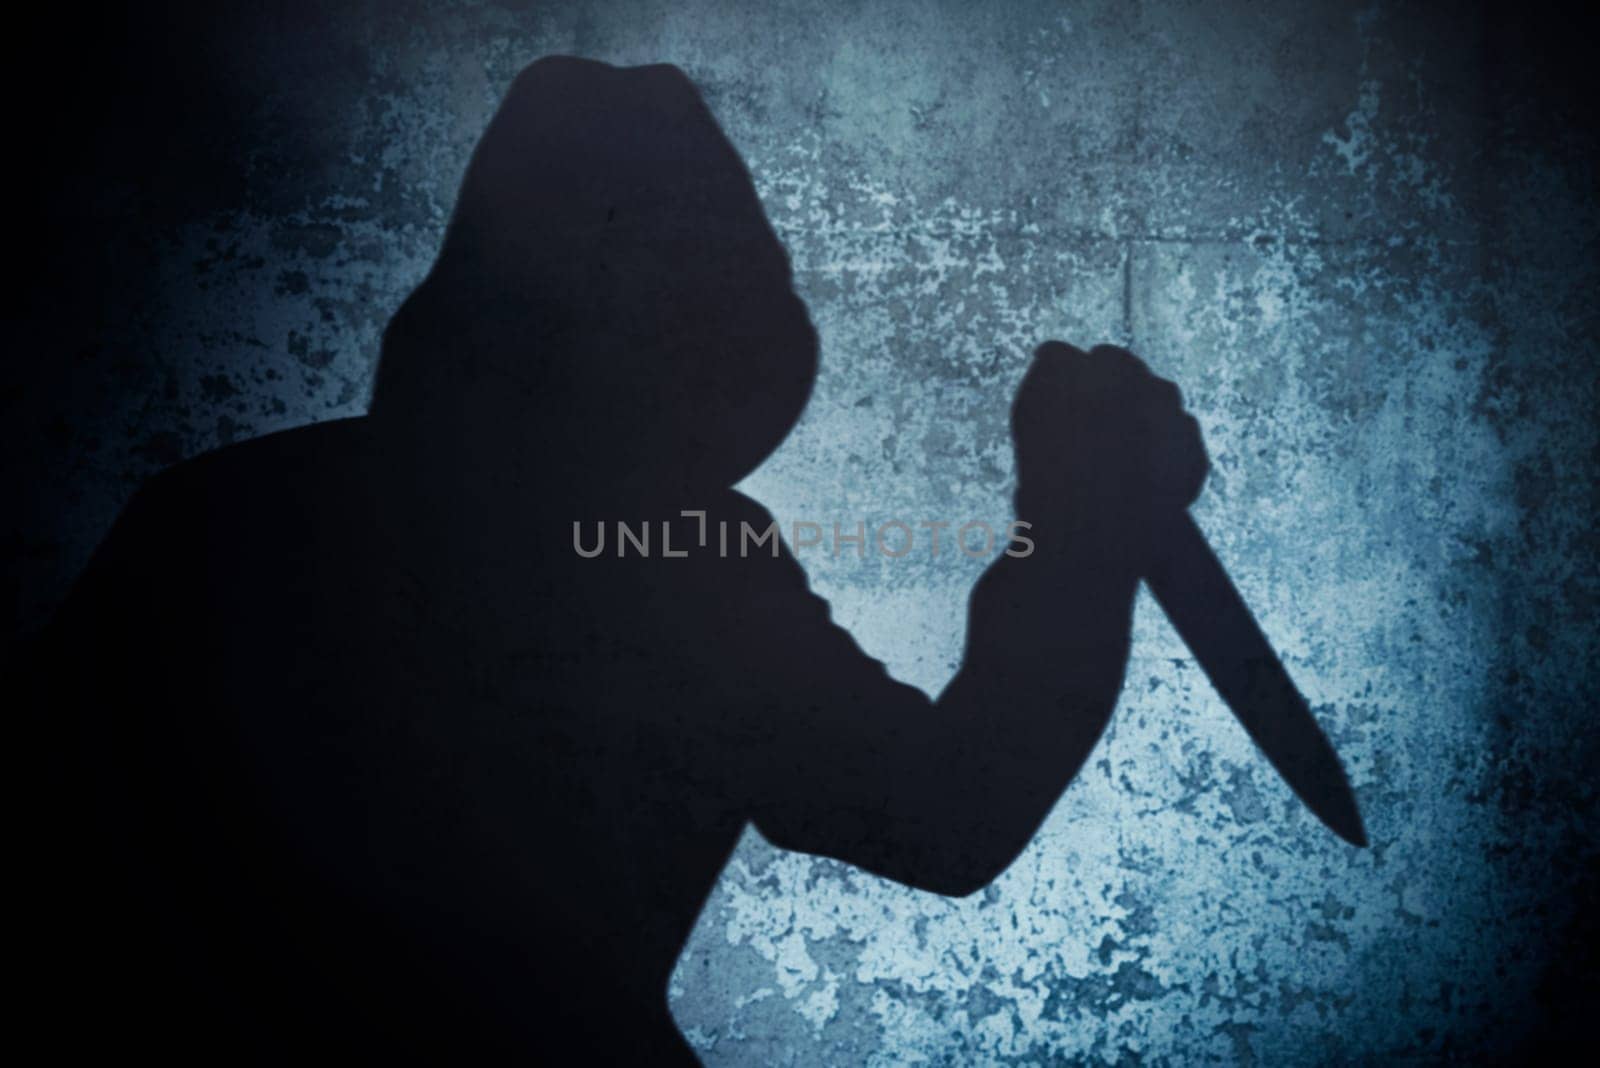 Silhouette criminal holding knife on dirty background